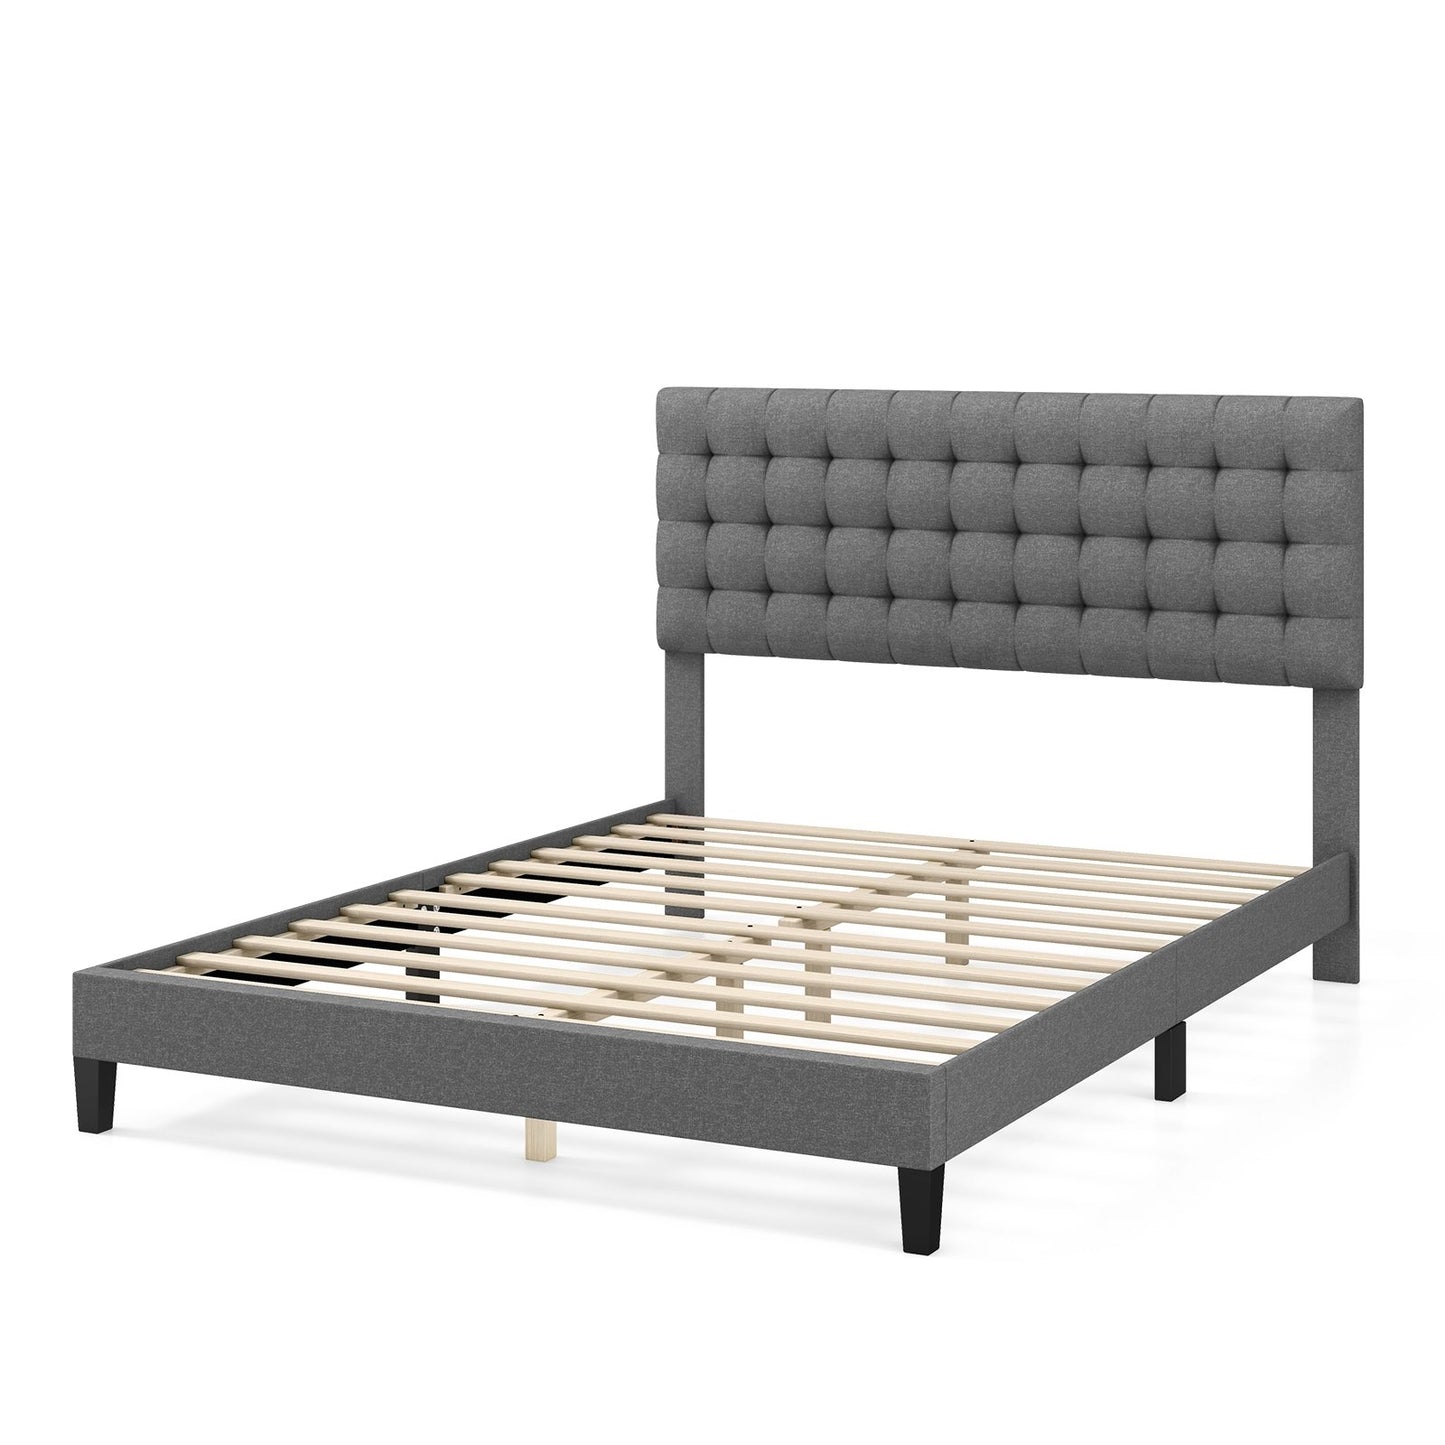 Queen Size Upholstered Platform Bed with Square Stitched Headboard